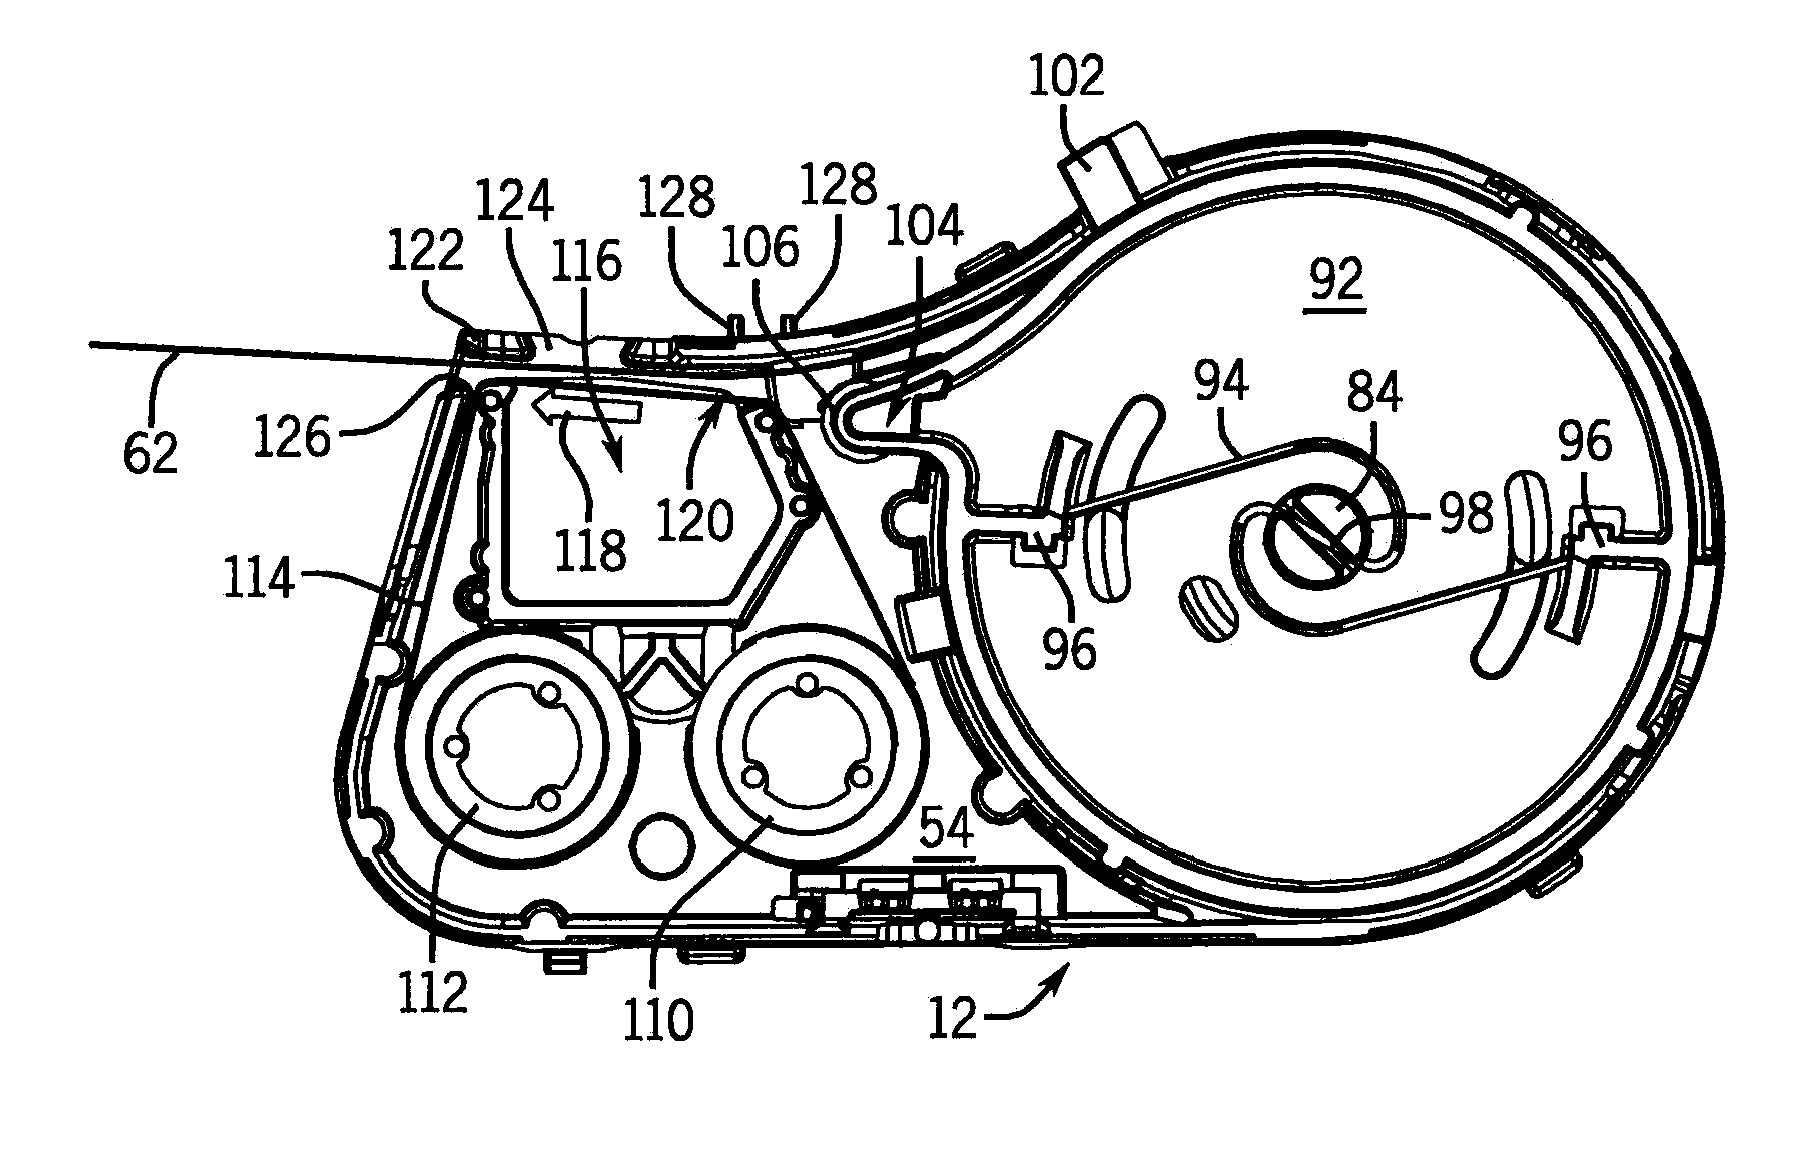 Cartridge assembly with ribbon lock